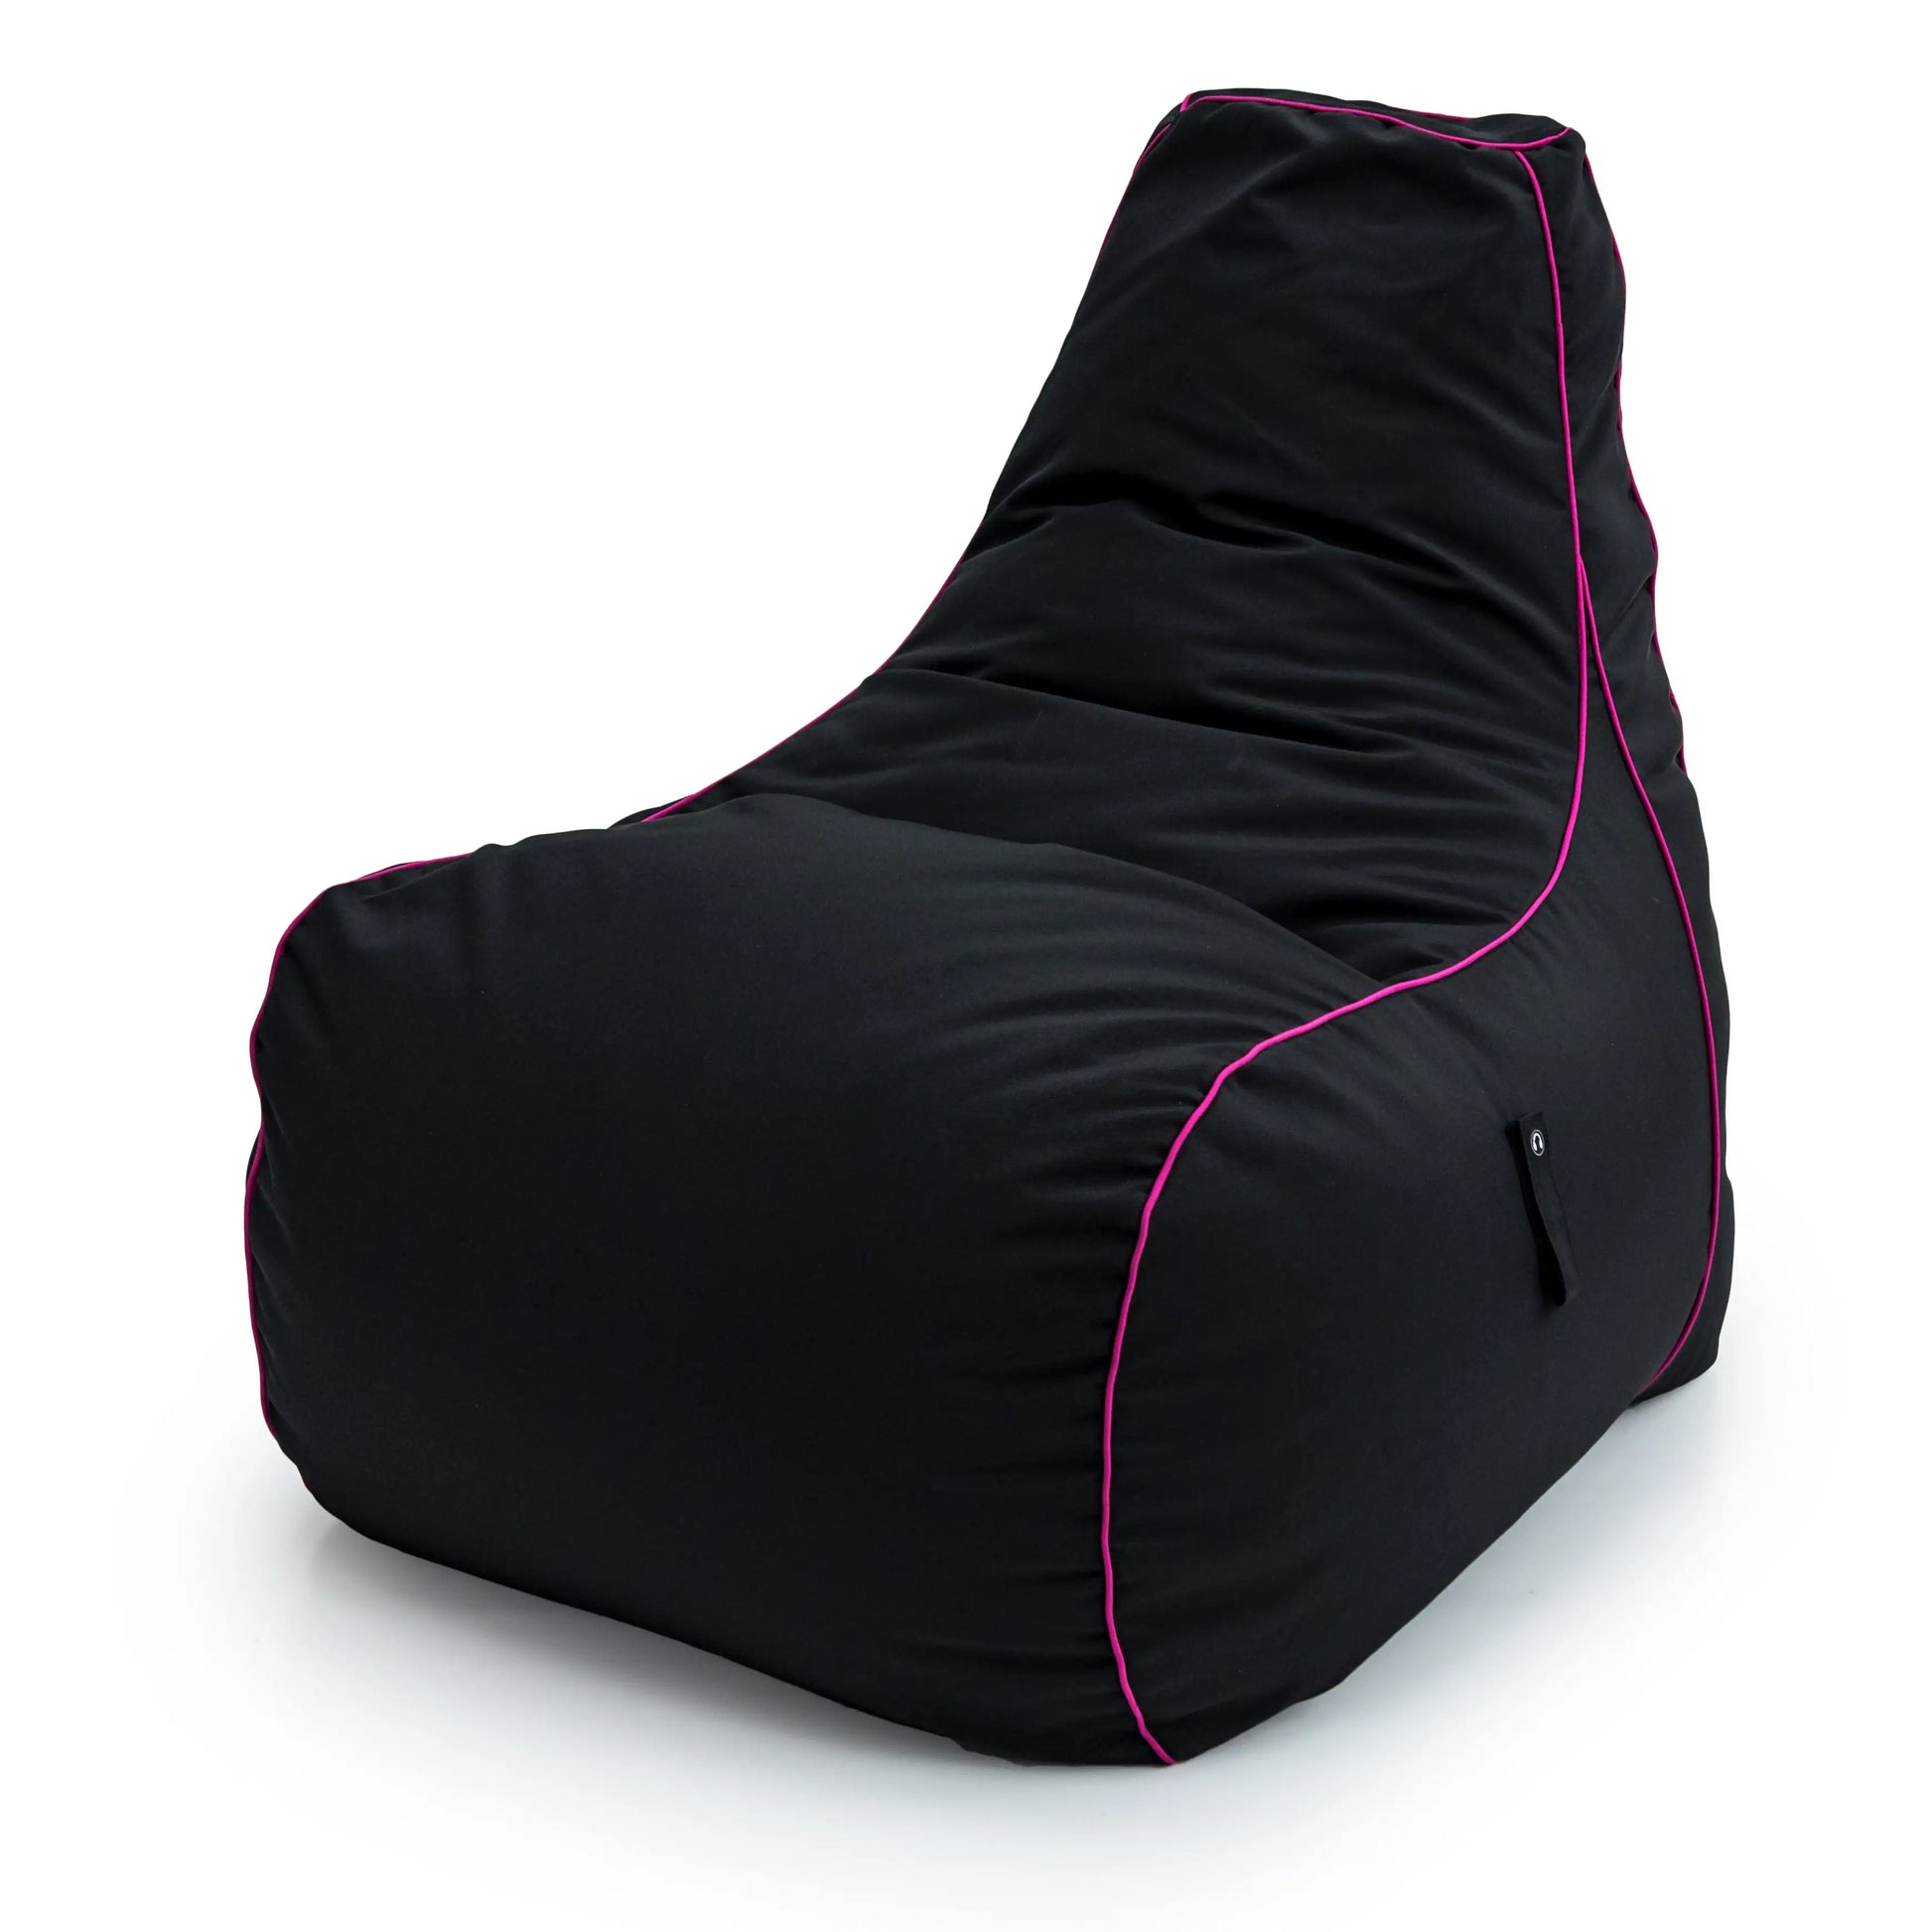 Bean bag chair with pink stitching